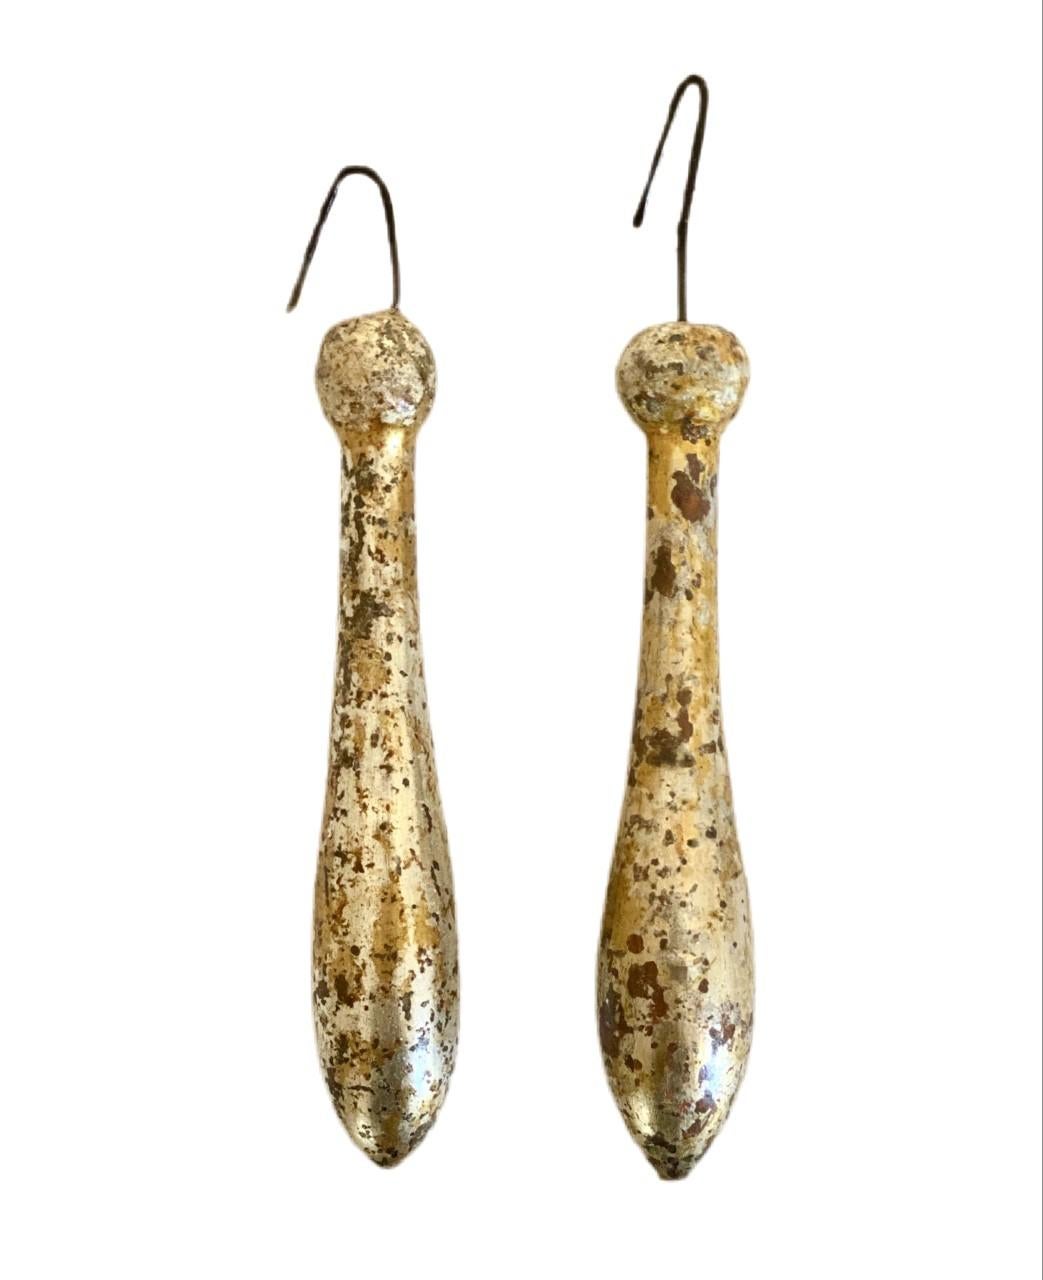 18th Century Italian hand-carved speckled gold and silver leaf tassel ornaments.

The tassels originally came from an Italian church in Tuscany and were used during feast days. These tassels were commonly used to adorn 18th and 19th century French